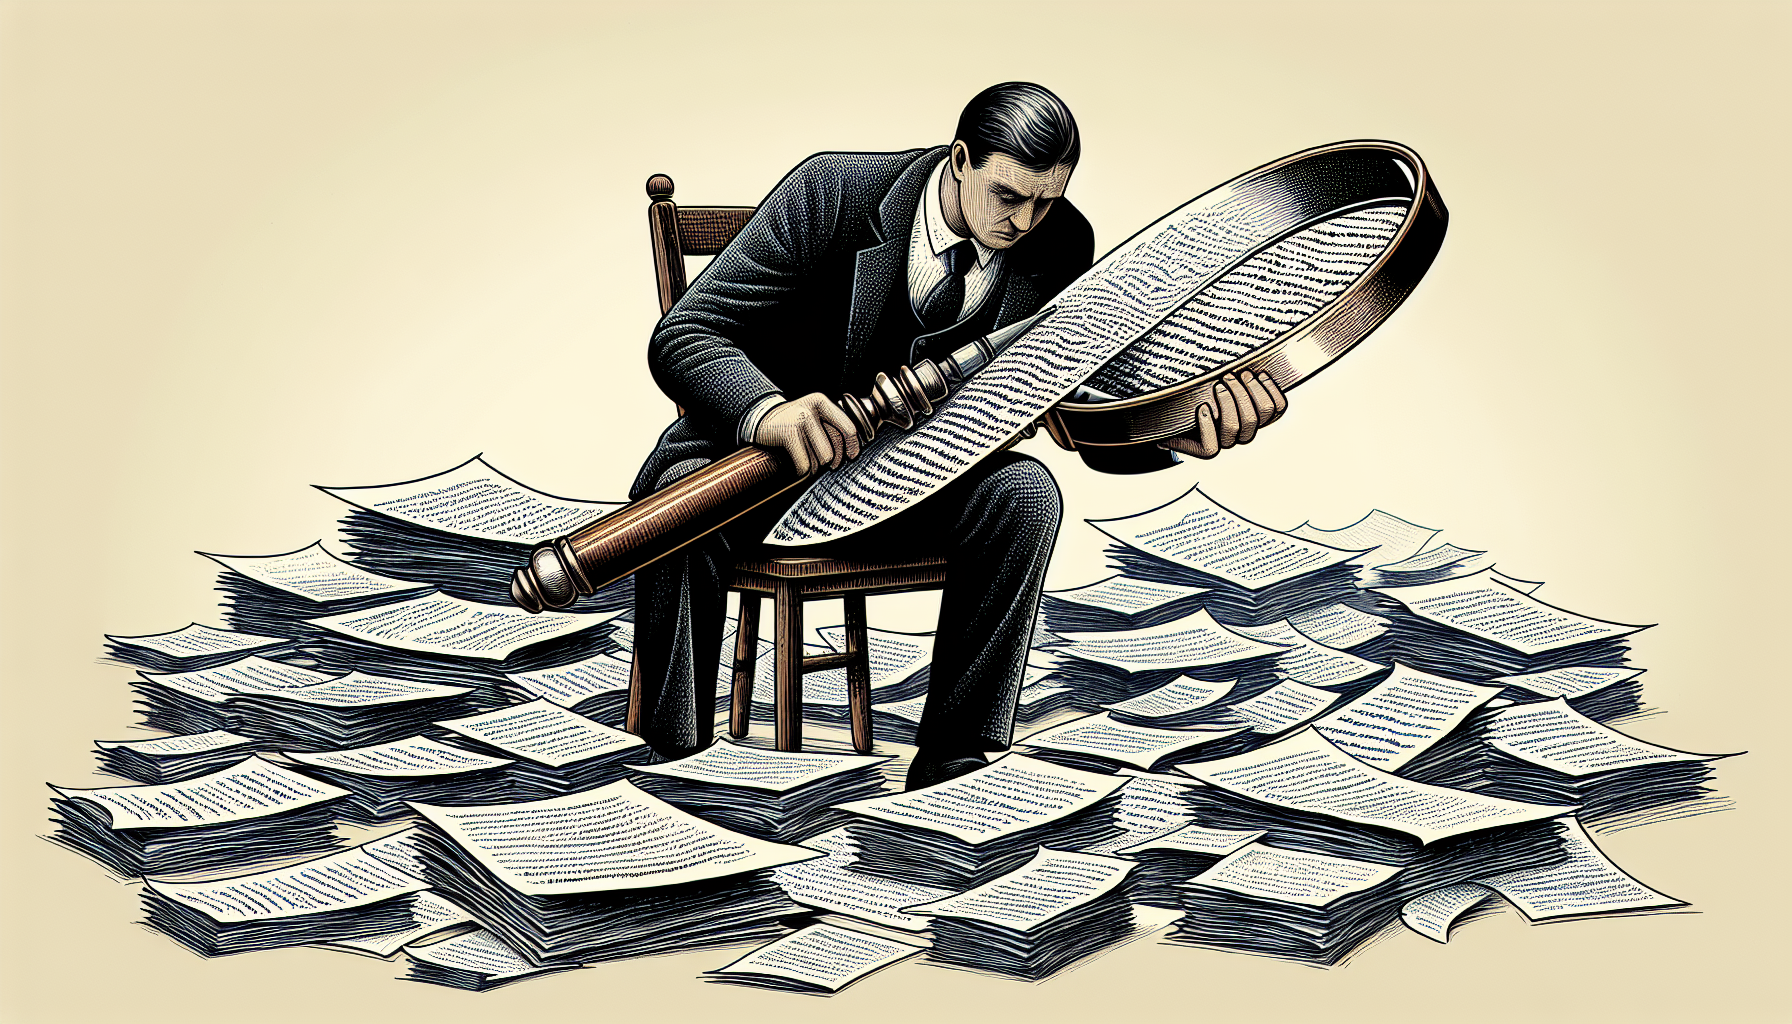 Illustration of a person searching through documents with a magnifying glass